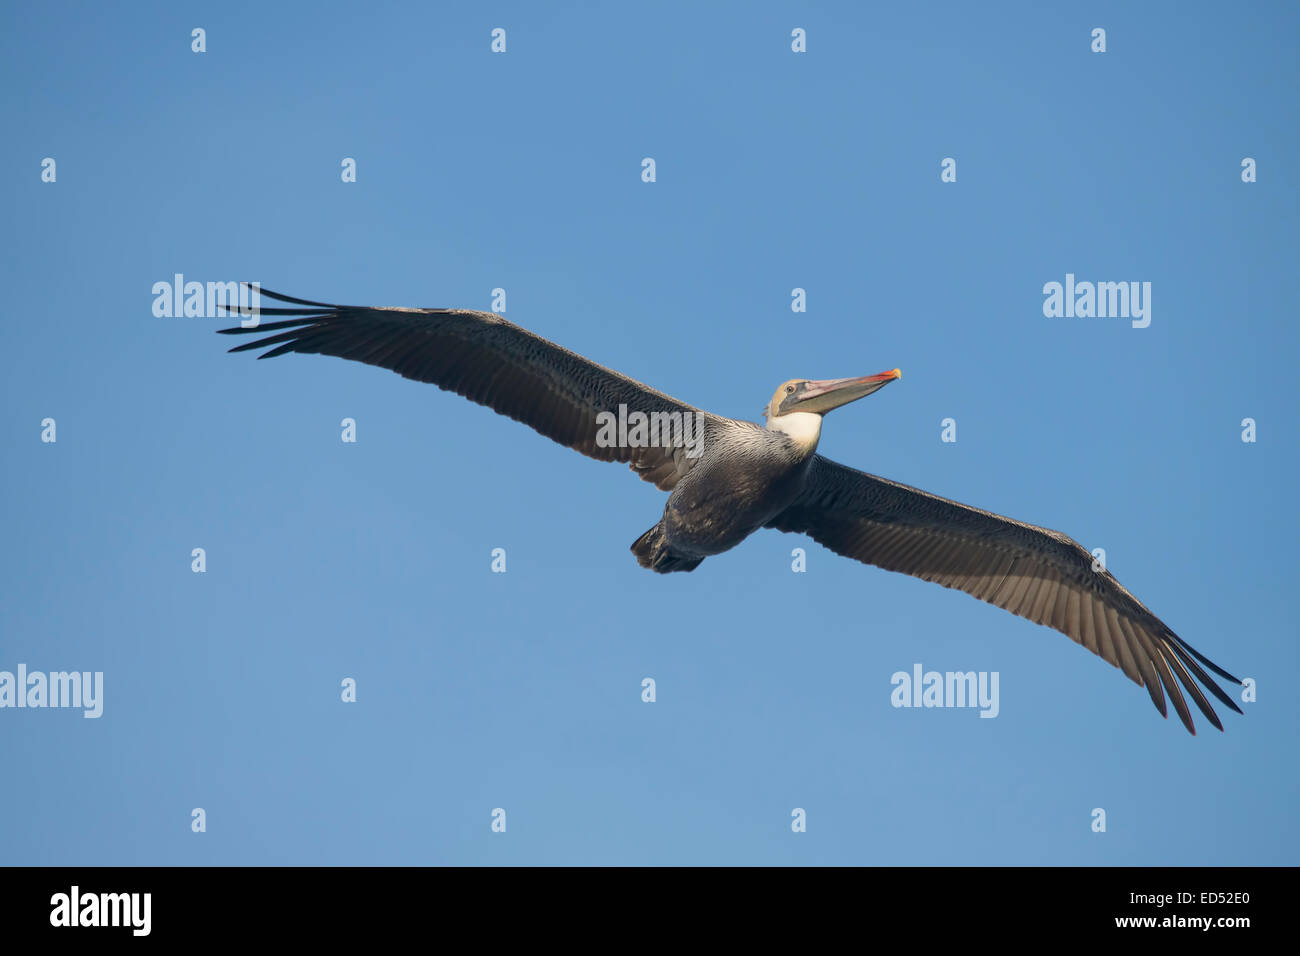 Adult Brown Pelican in flight, clear blue sky background. Stock Photo